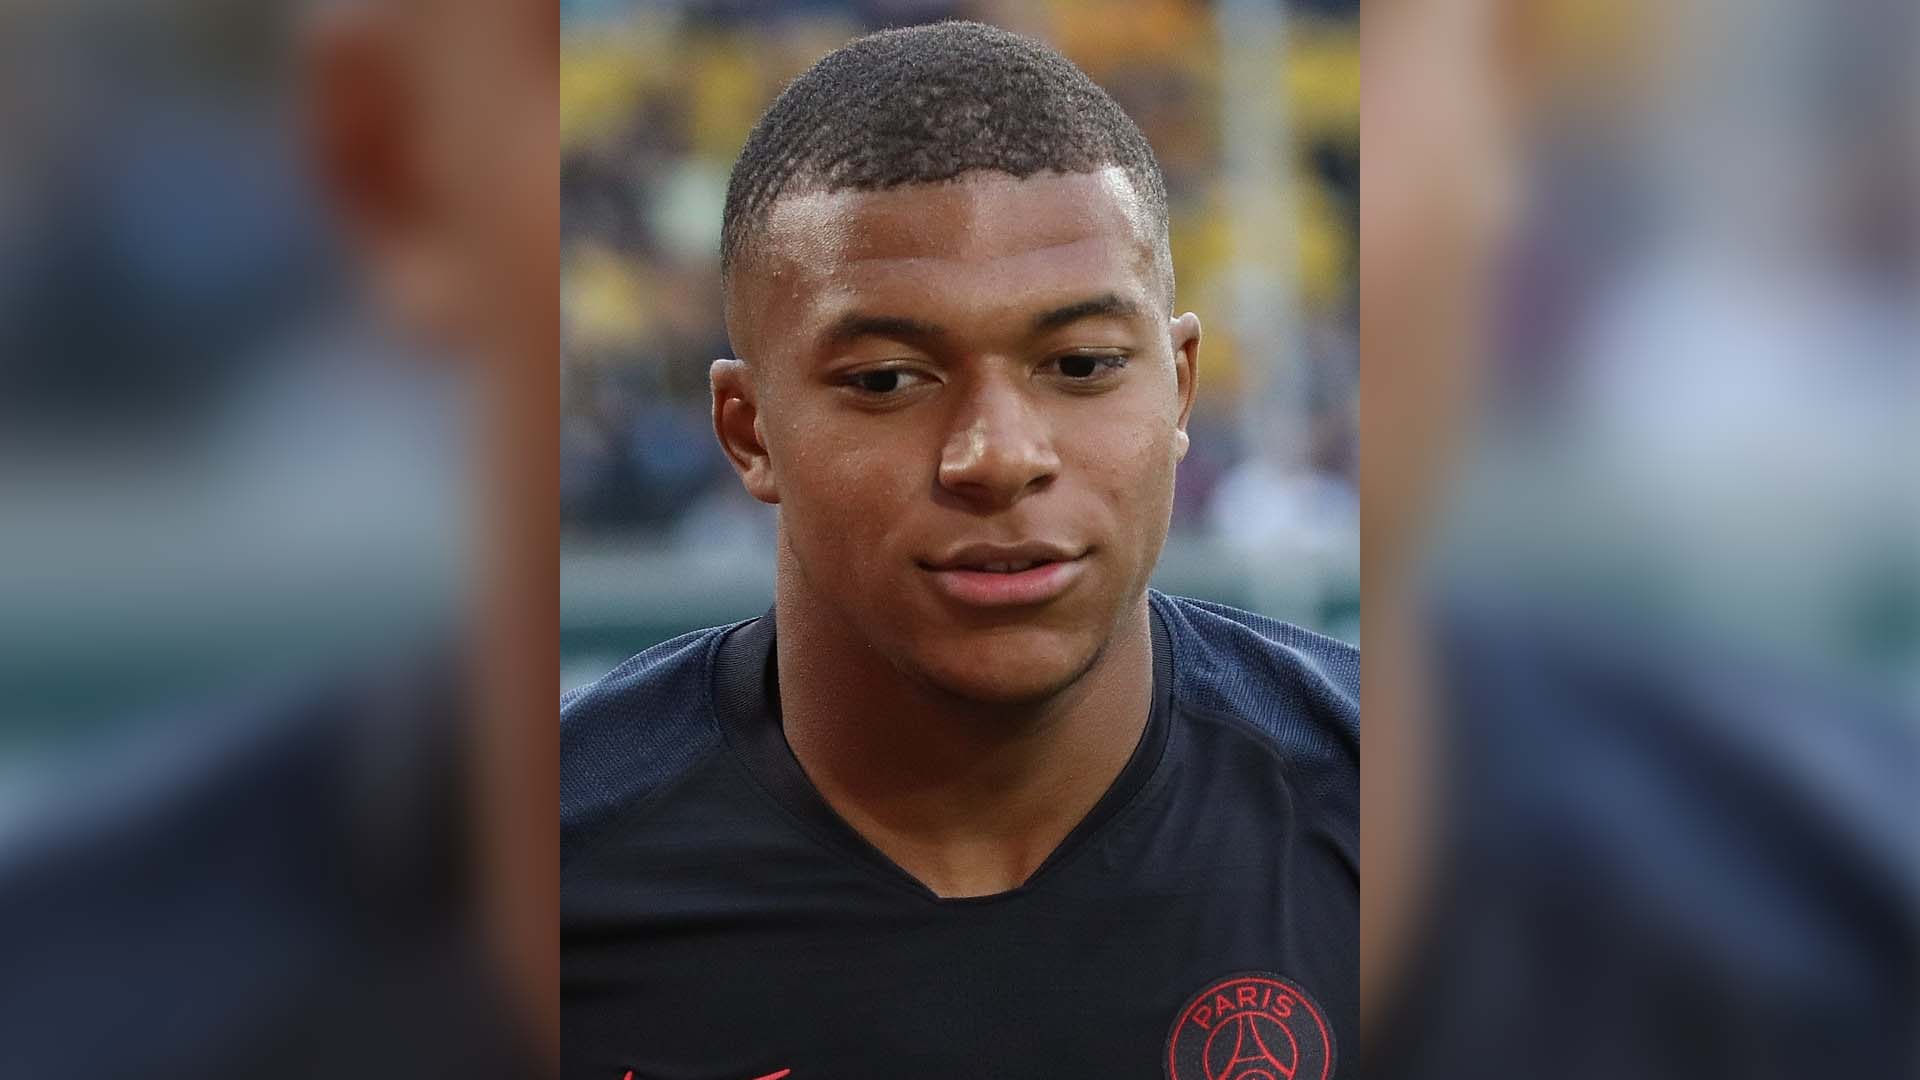 Kylian Mbappé's Injury Throws France's Euro Hopes in Doubt